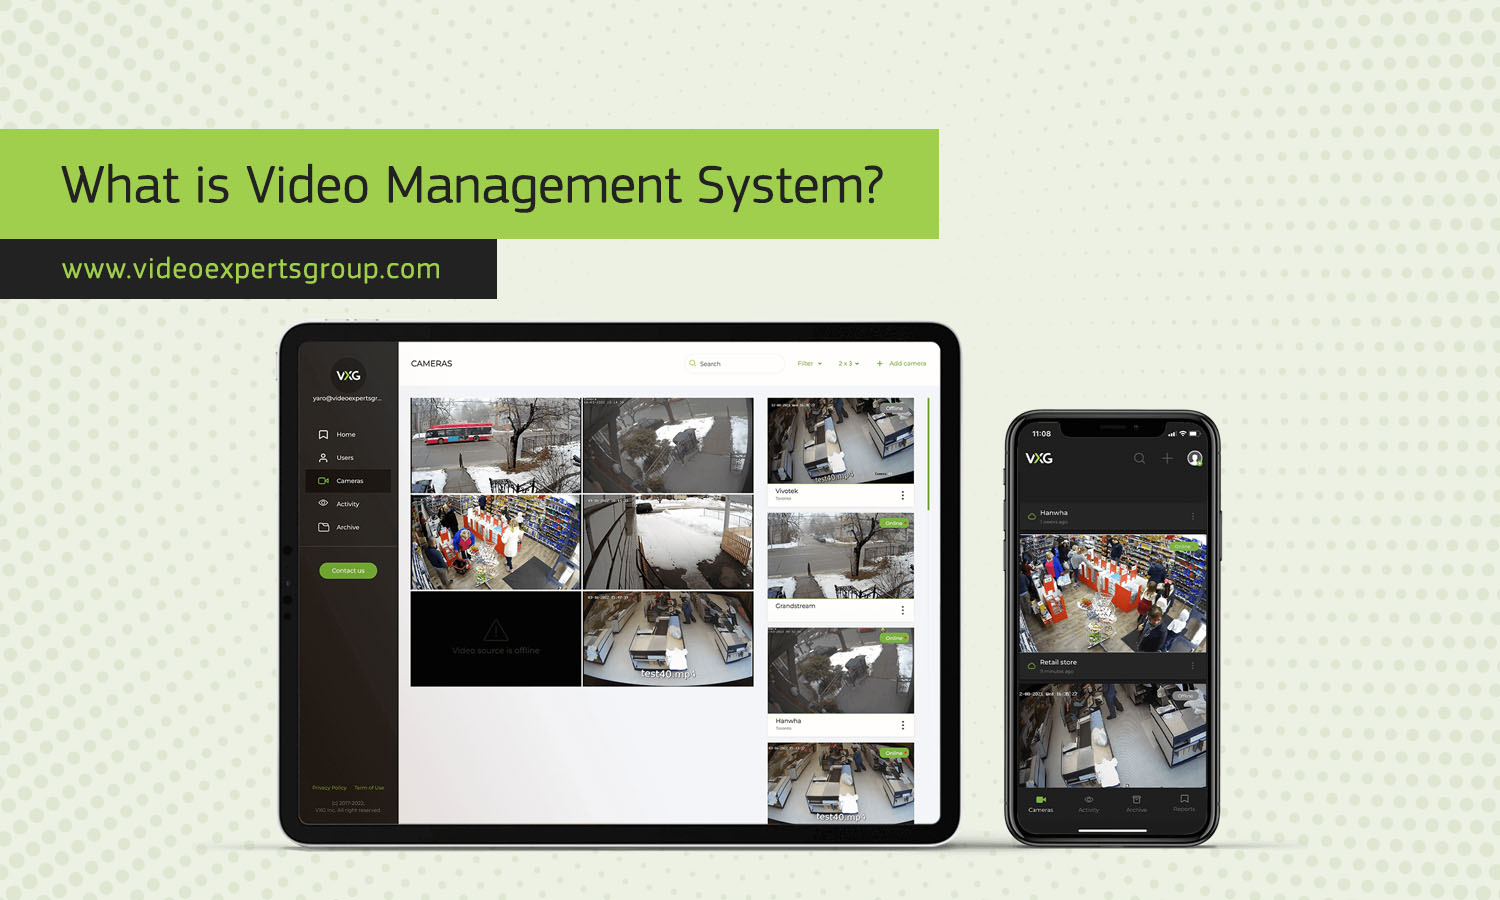 What is a Video Management System (VMS)?